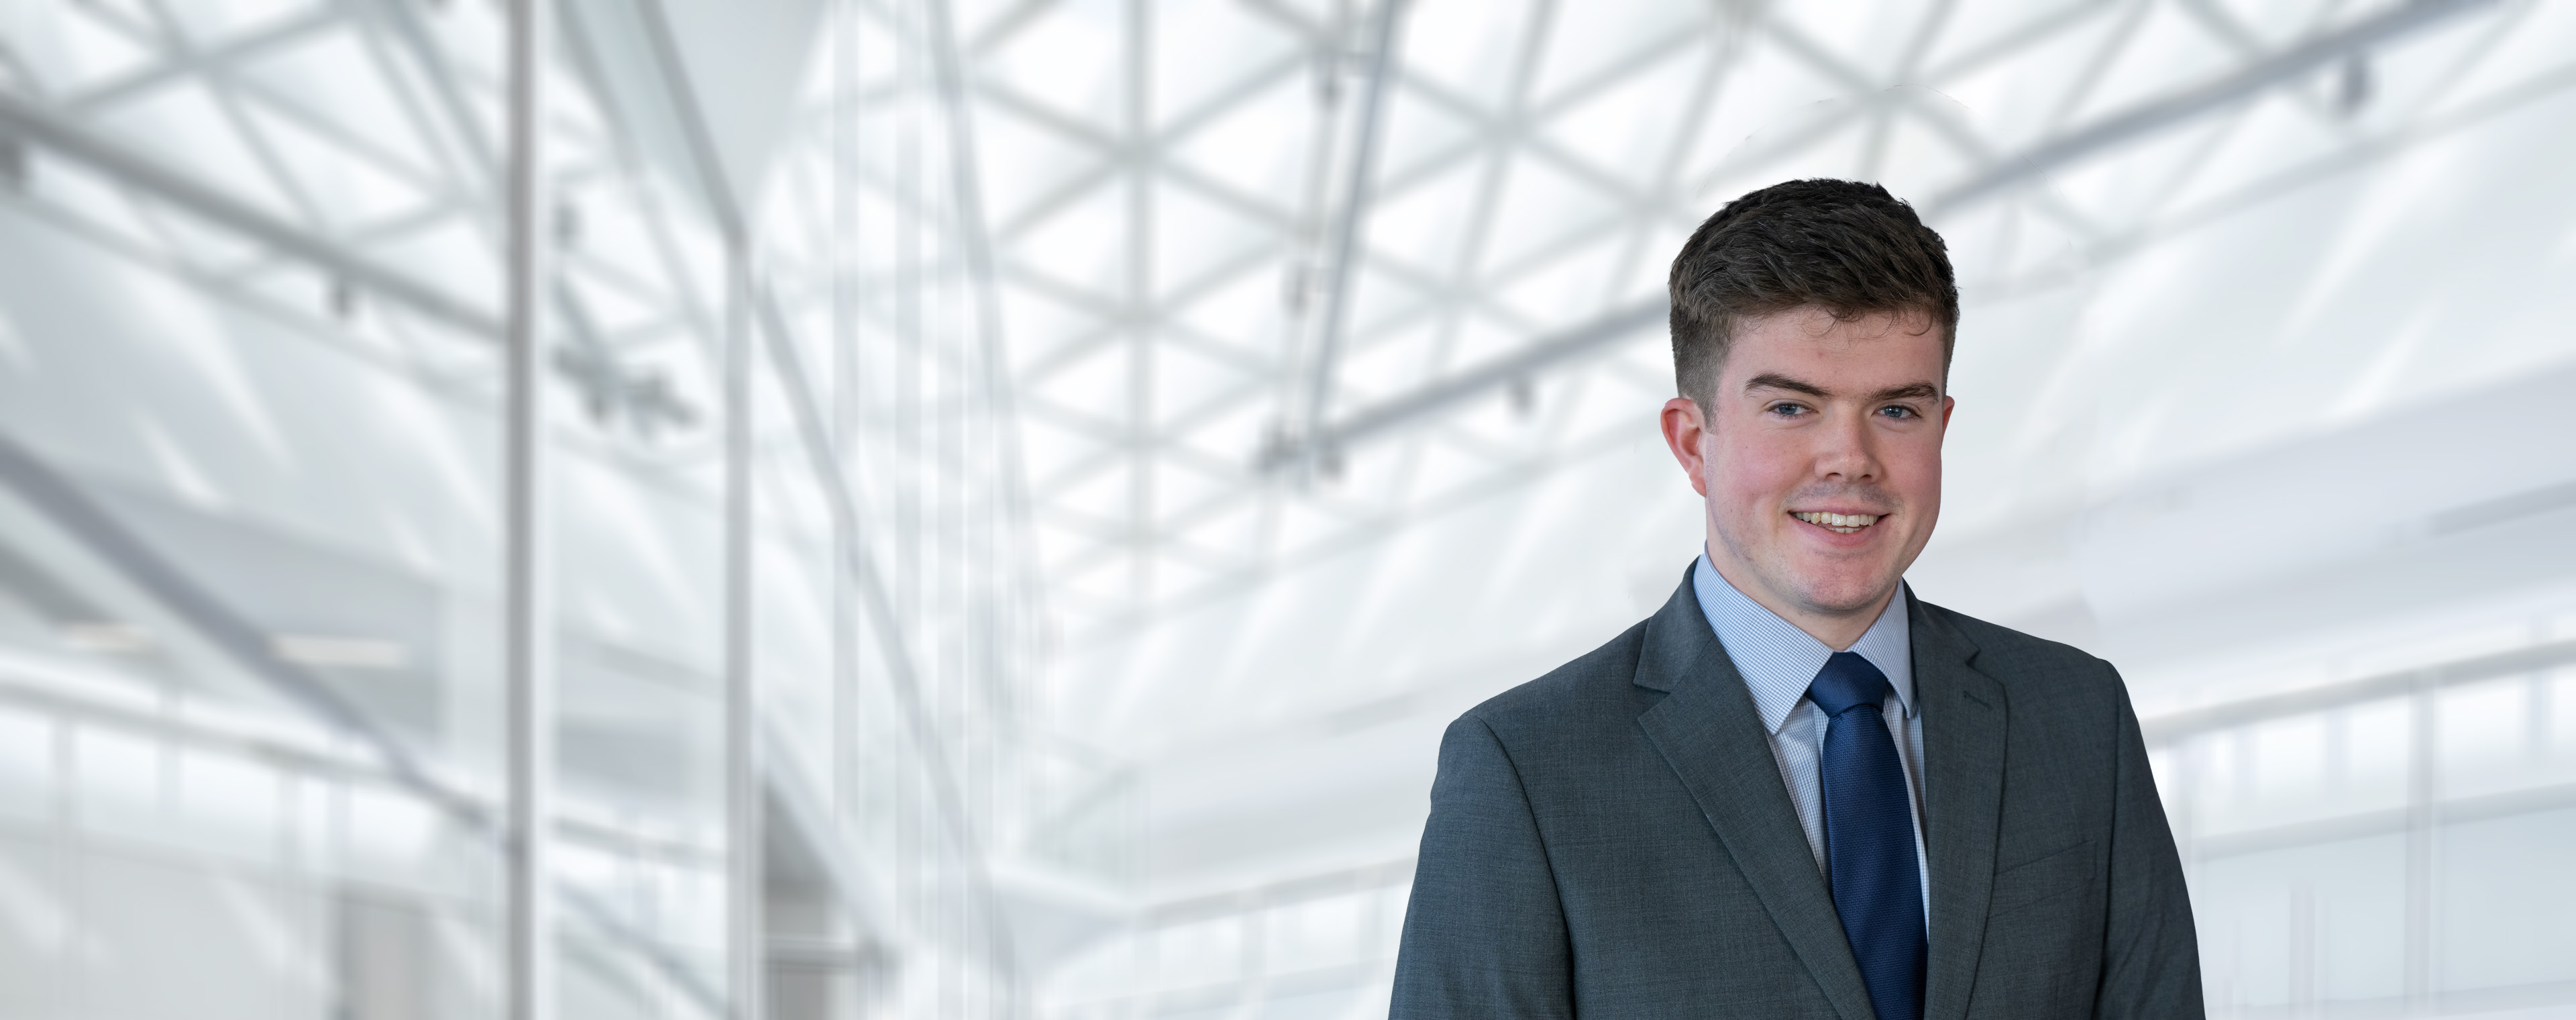 Liam Martin | Trainee Solicitor at Thorntons Solicitors